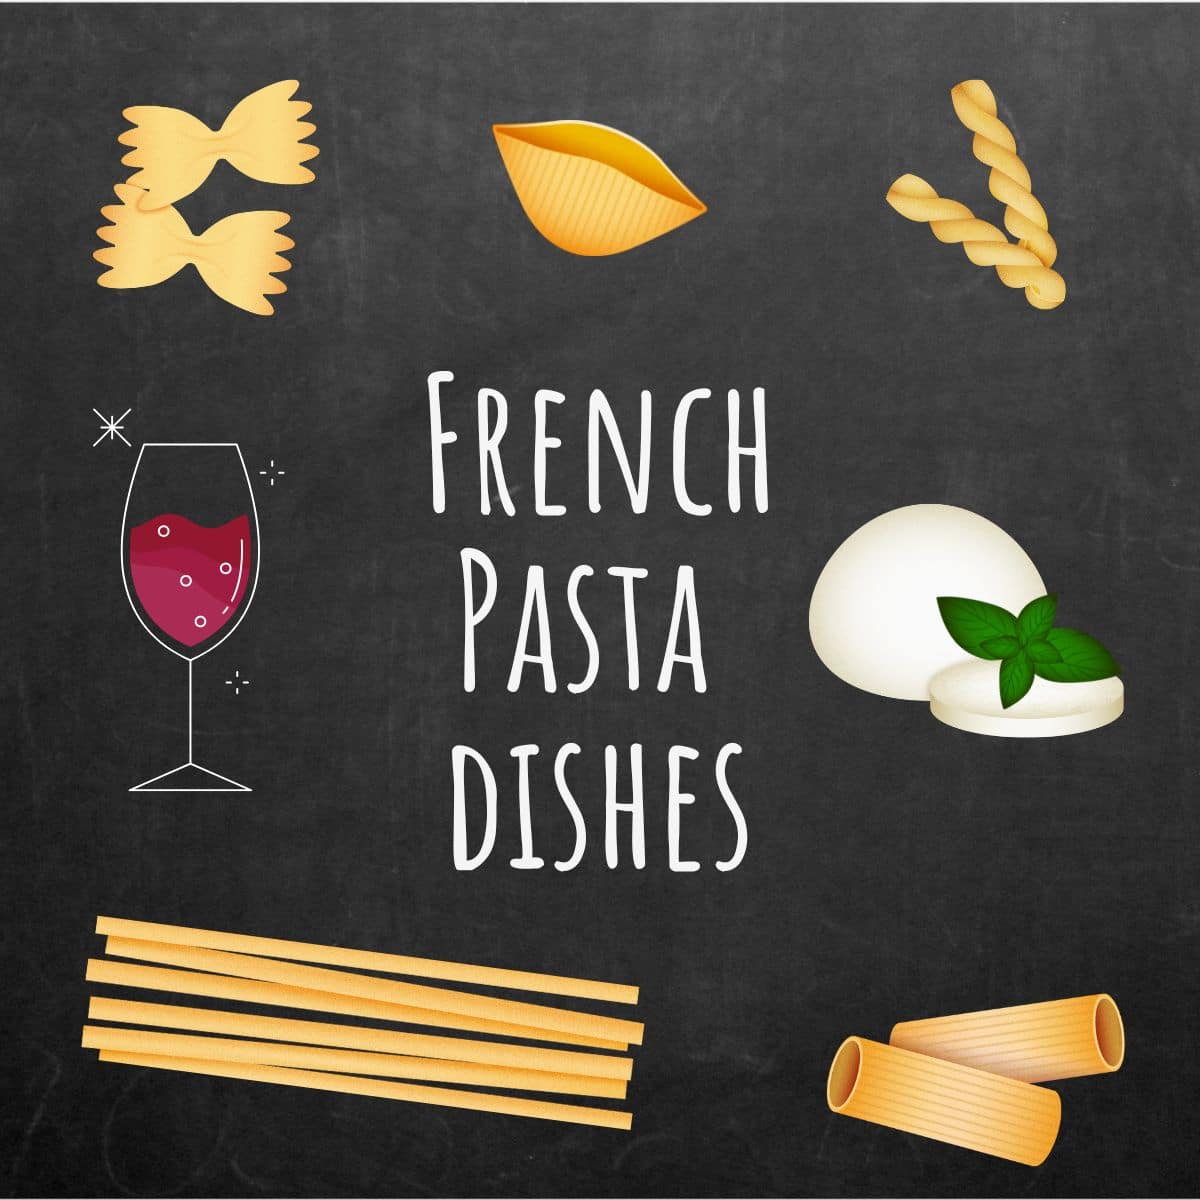 French pasta dishes